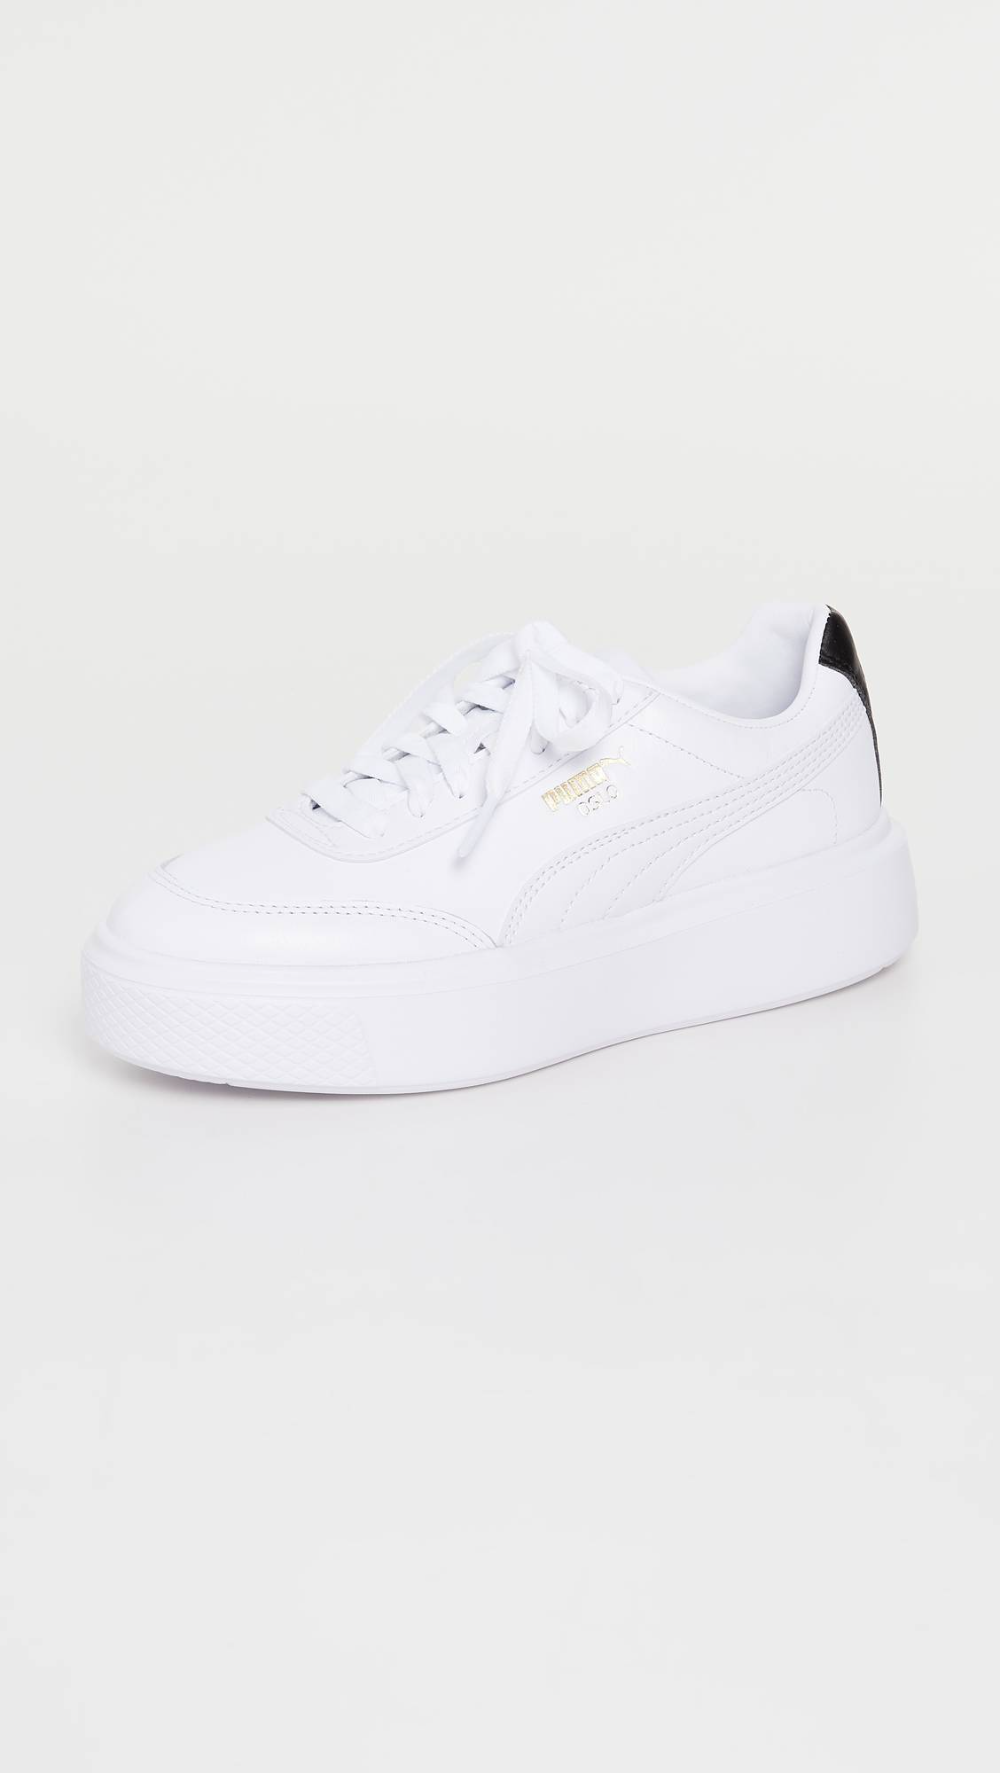 13 Best White Platform Sneakers Outfit Ideas for Women: Style Guide